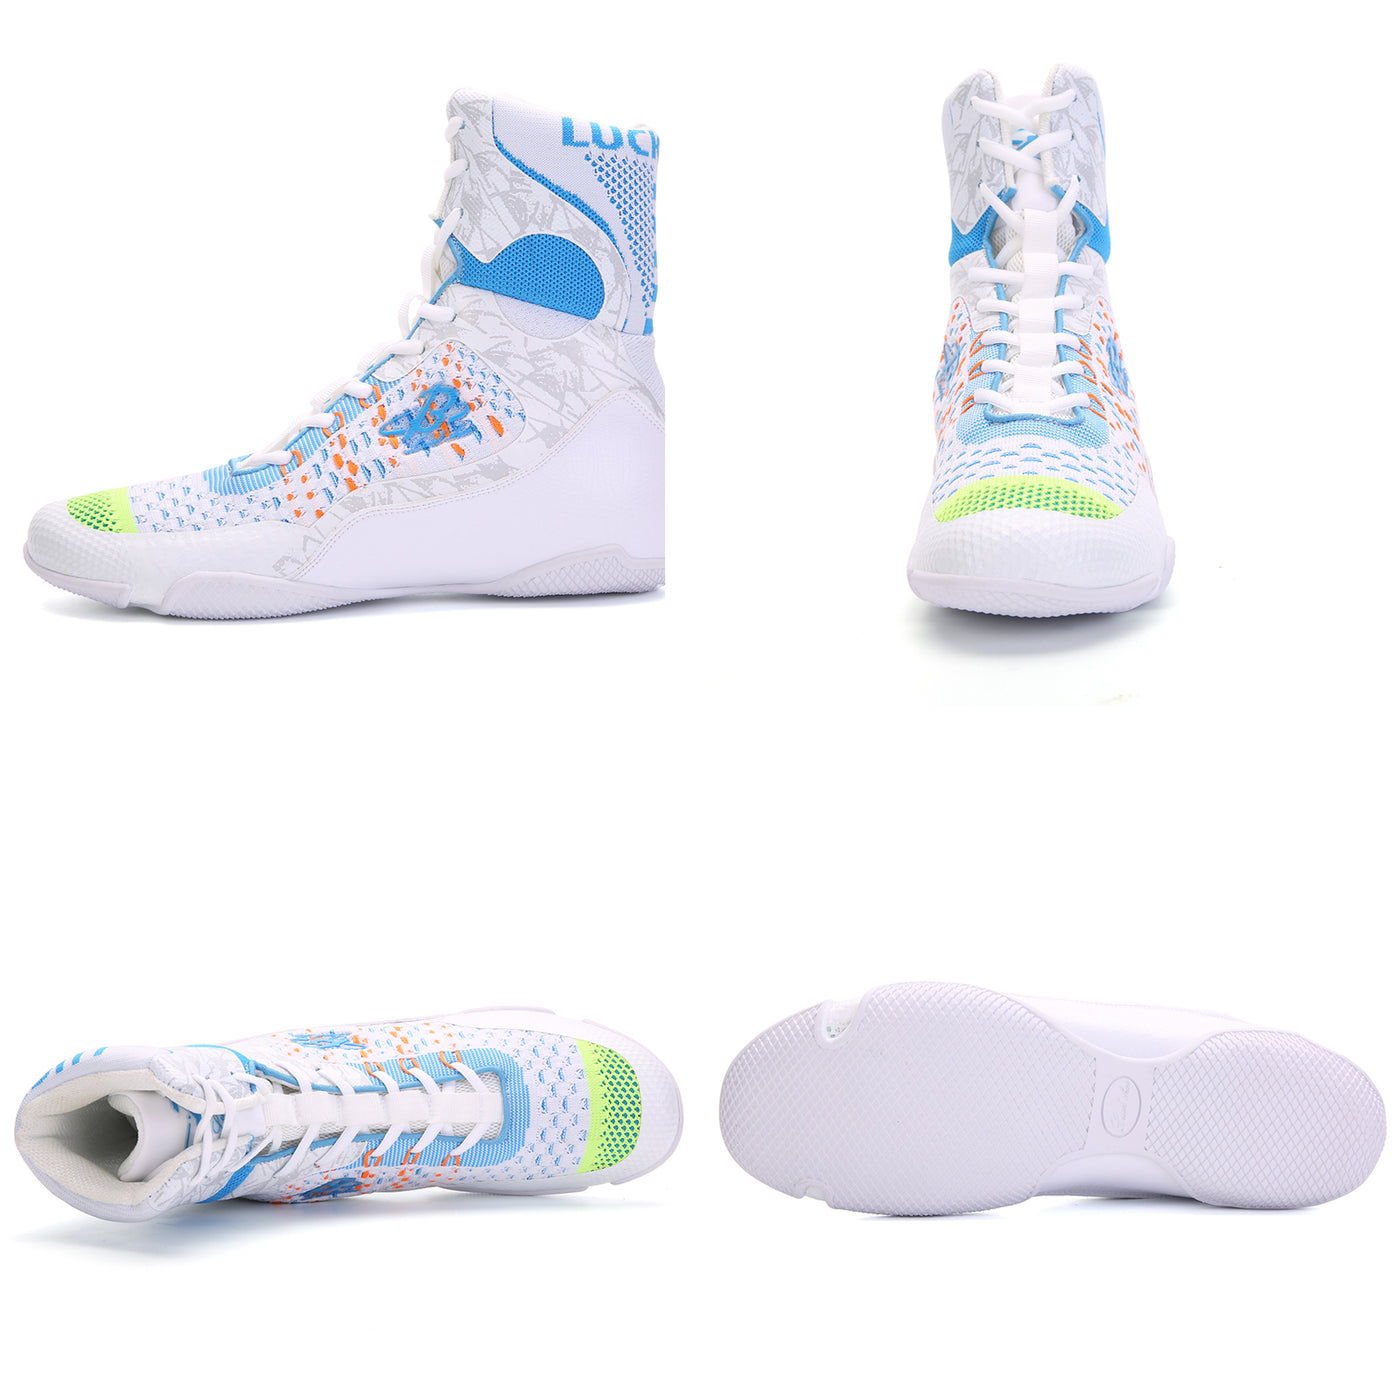 B LUCK SHOE Boxing Shoes for Men, Unisex Hi-top Breathable Boxing Boots Wrestling Shoes for Kids, Youth, Adults LS-198 WHITE